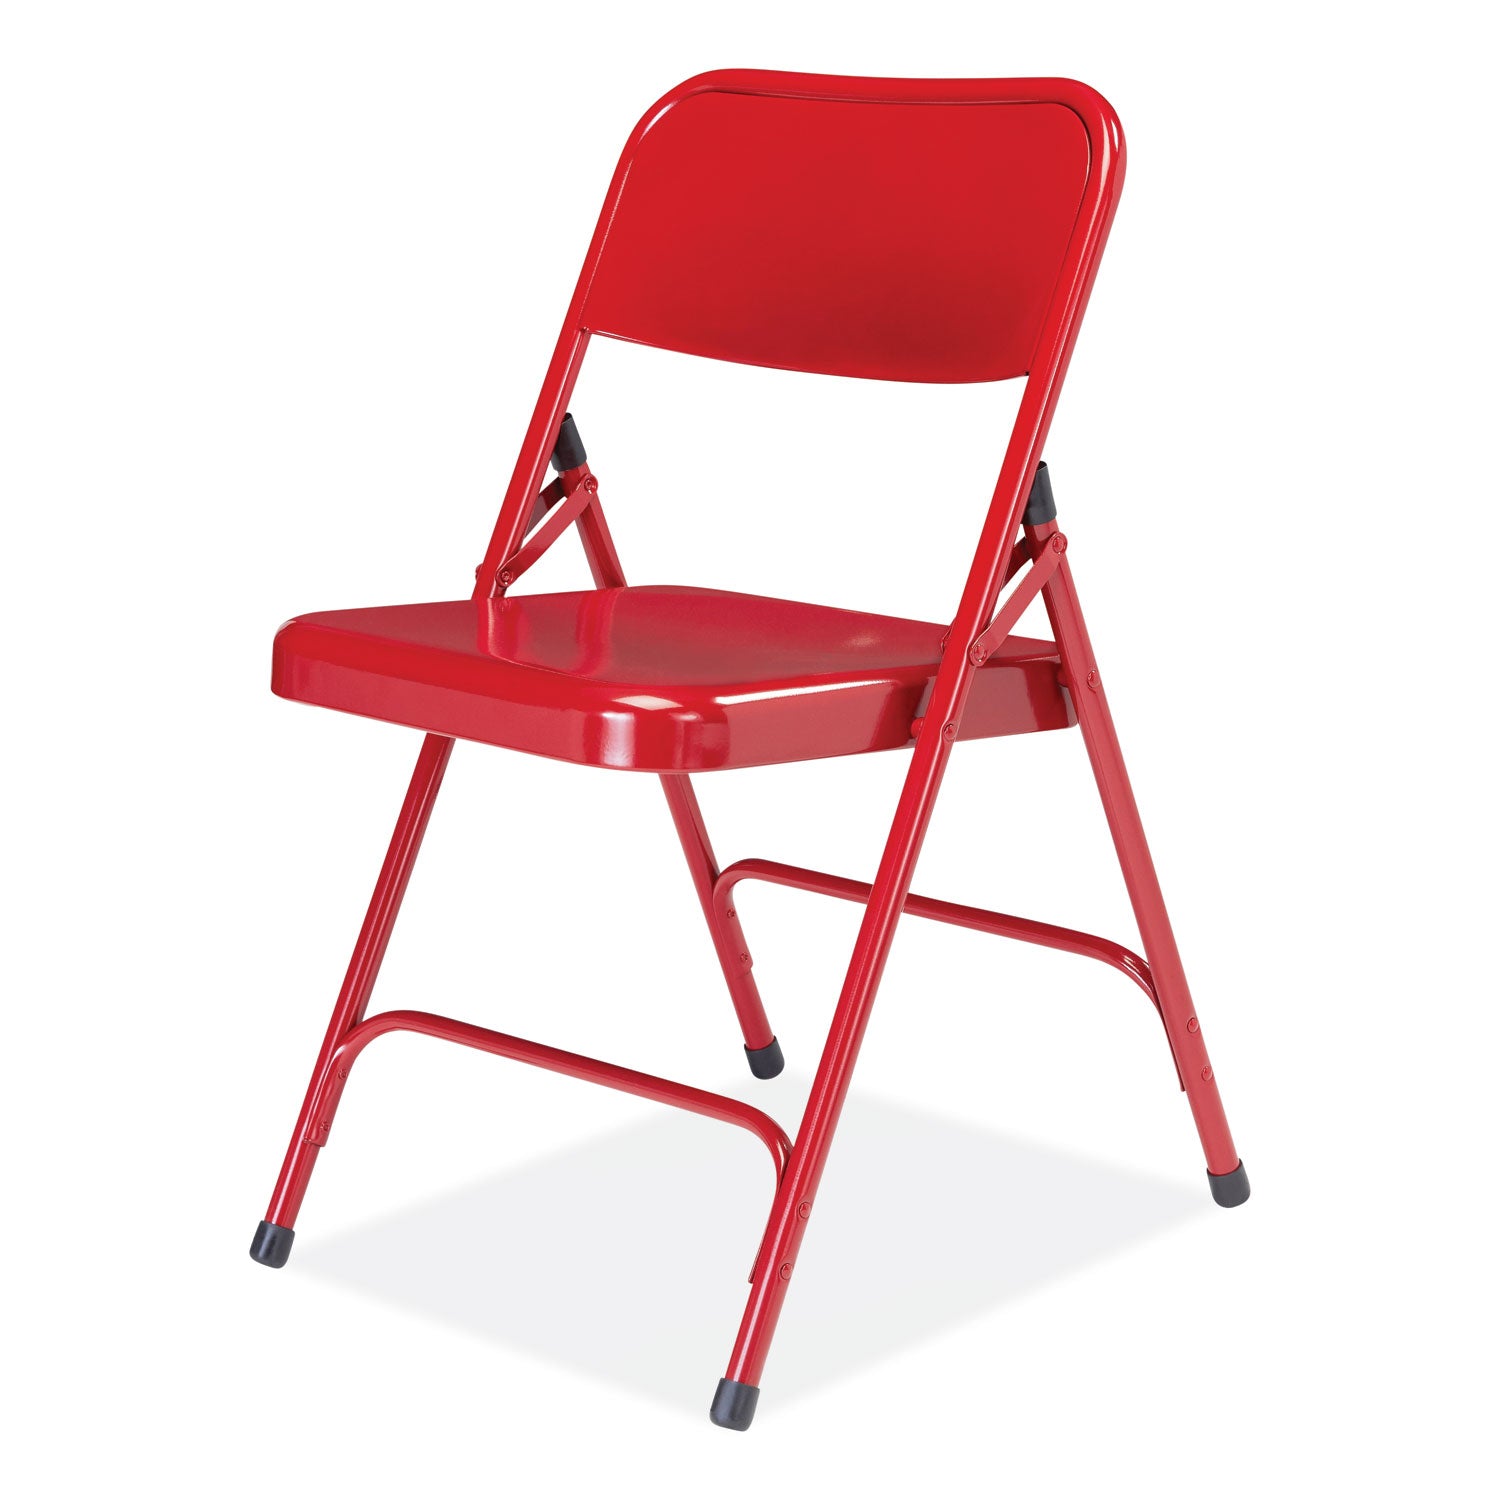 200-series-premium-all-steel-double-hinge-folding-chair-supports-500-lb-1725-seat-height-red-4-ctships-in-1-3-bus-days_nps240 - 3